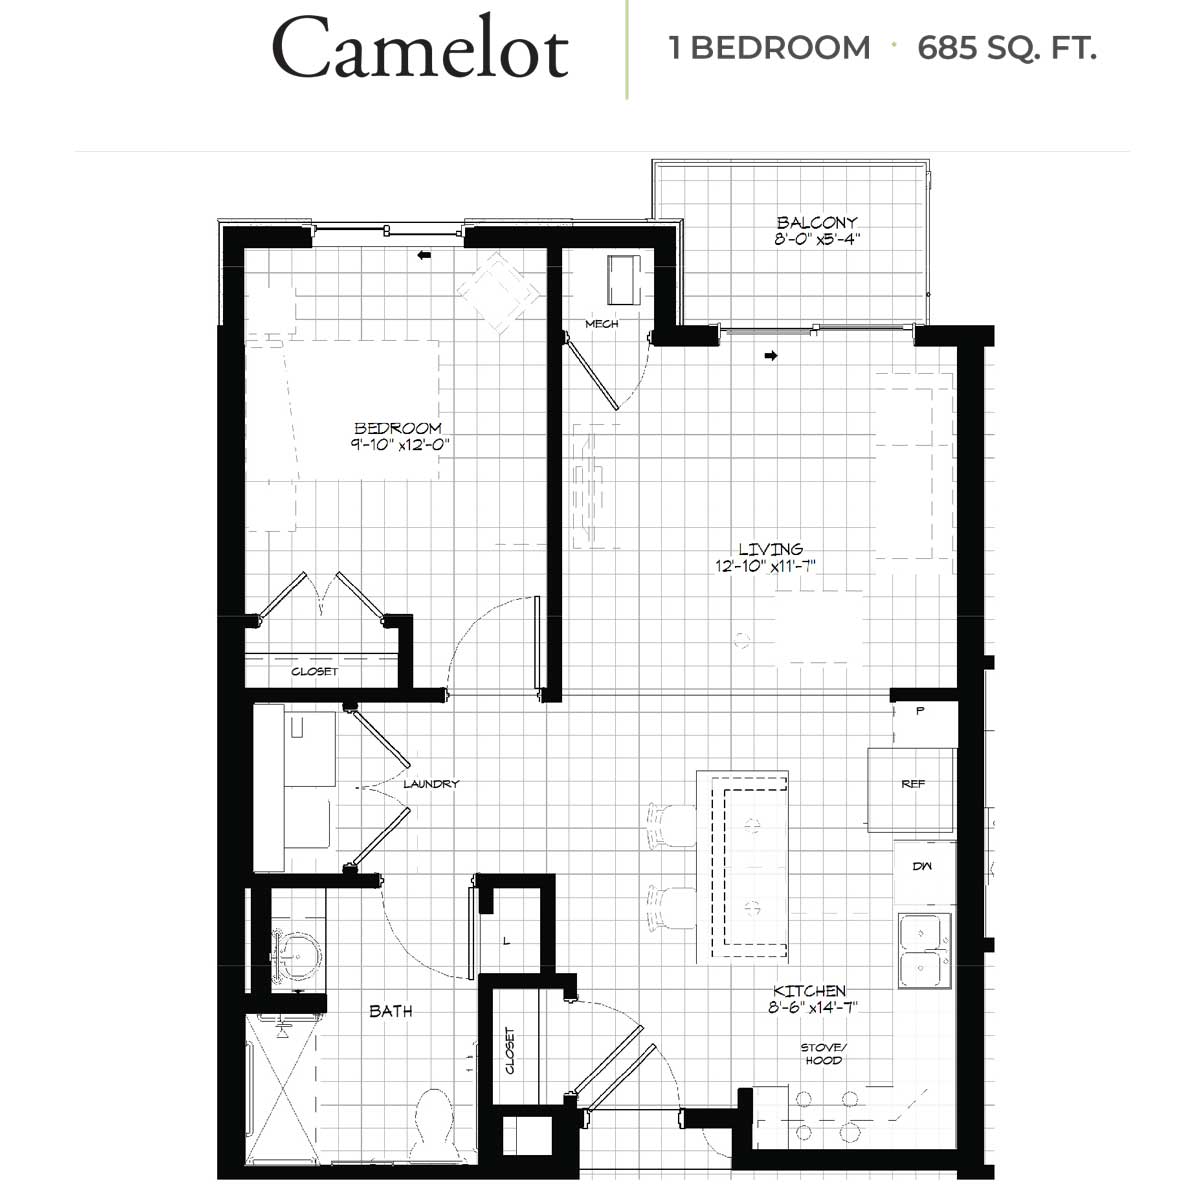 Floor plan of the 685 sq. ft. Camelot one-bedroom apartment with living, kitchen, bath, and balcony